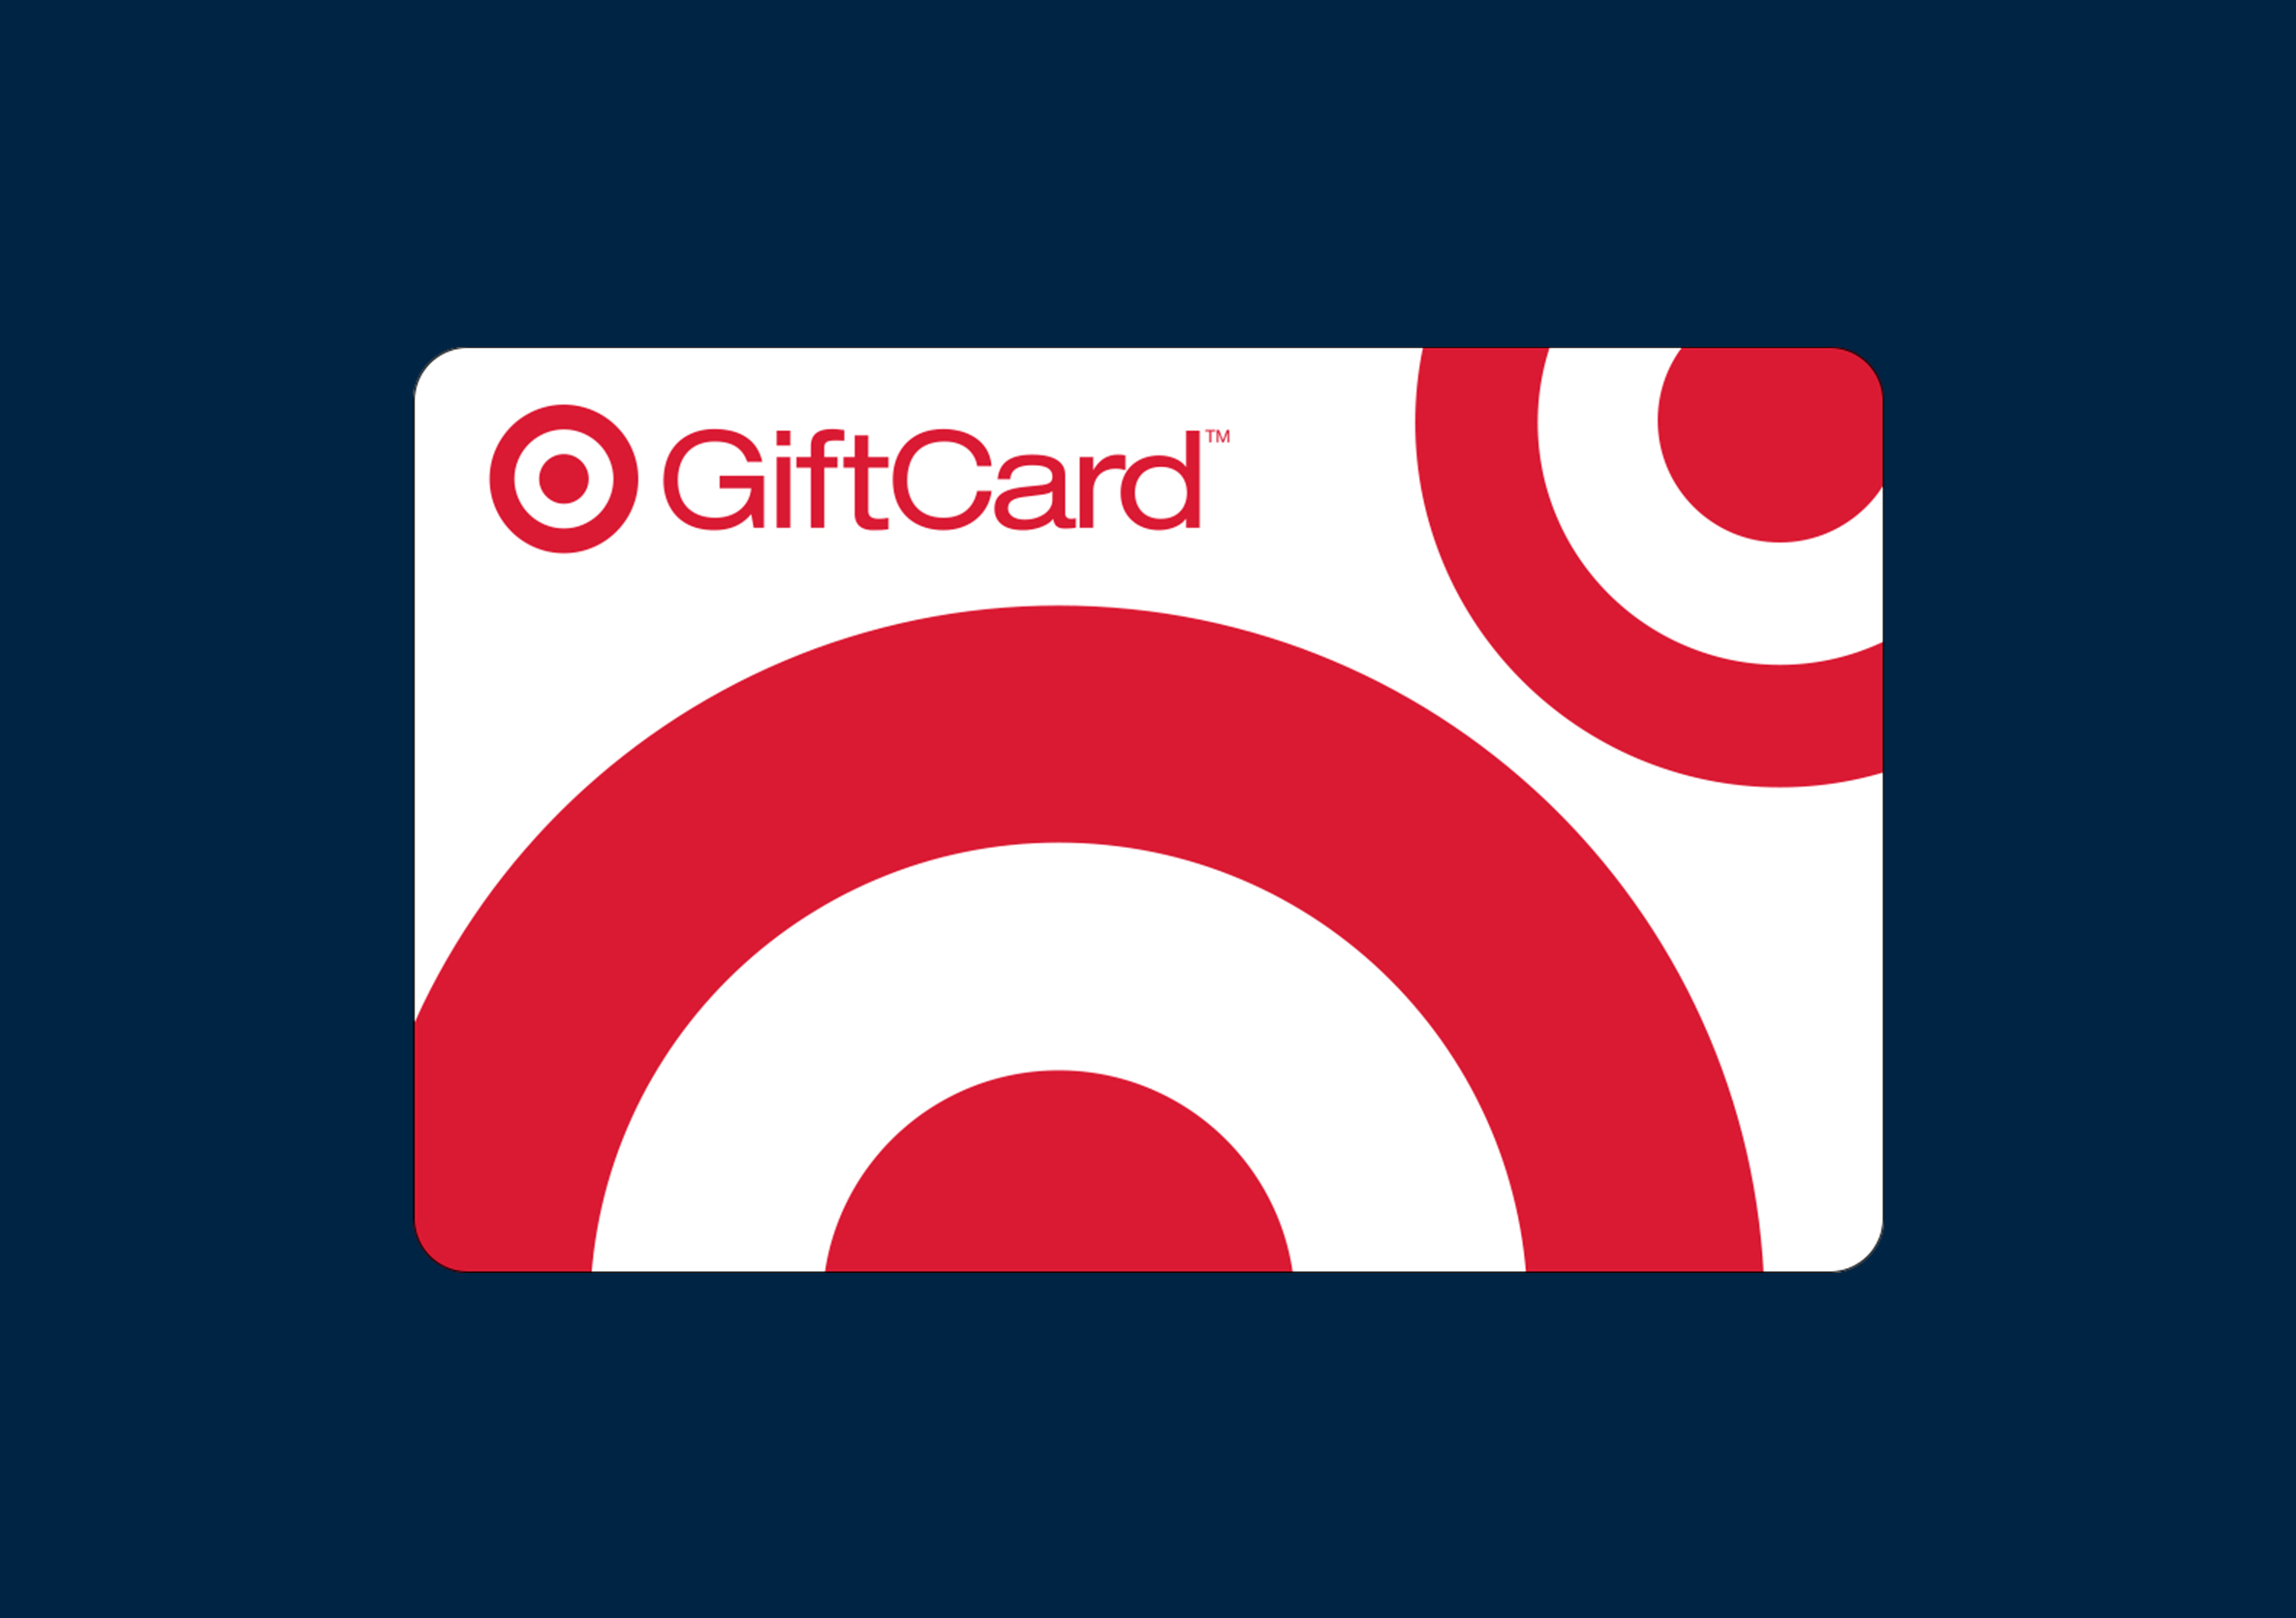 An image of a Target gift card